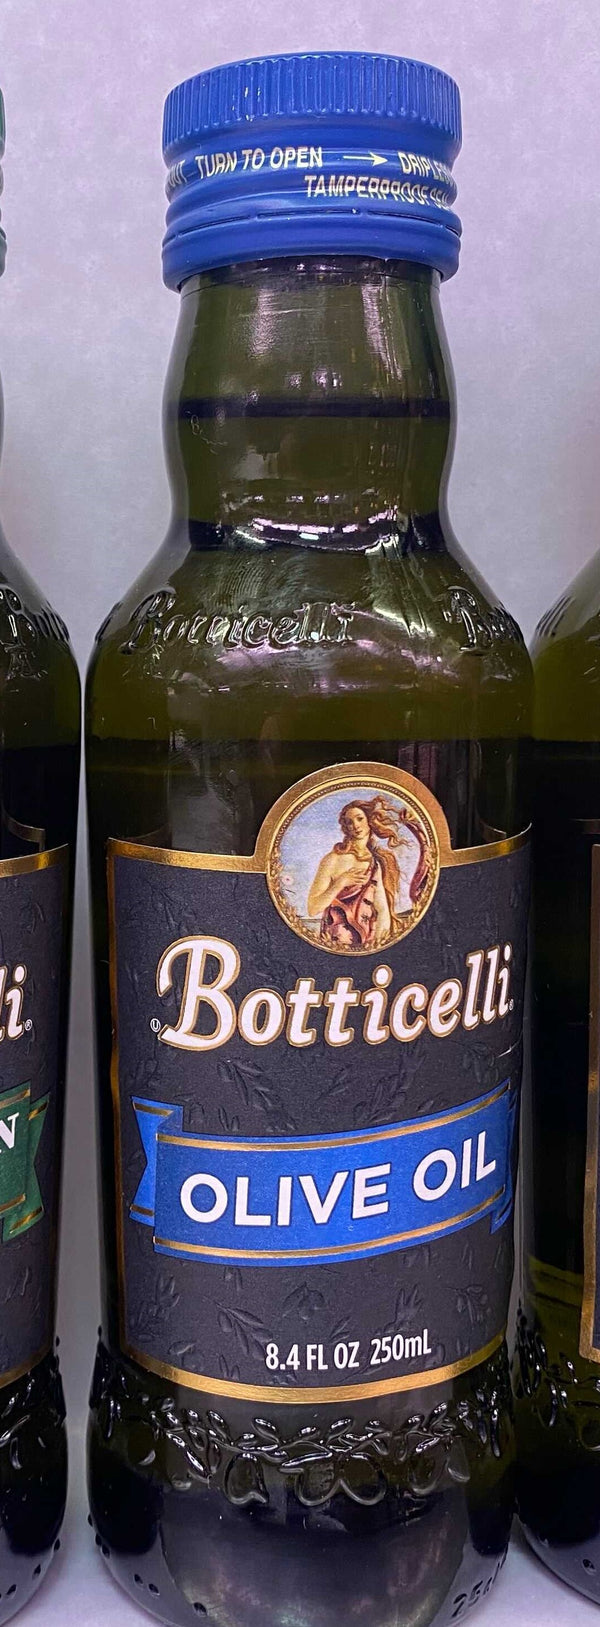 Monthly Special! Botticelli Olive Oil 8.4oz